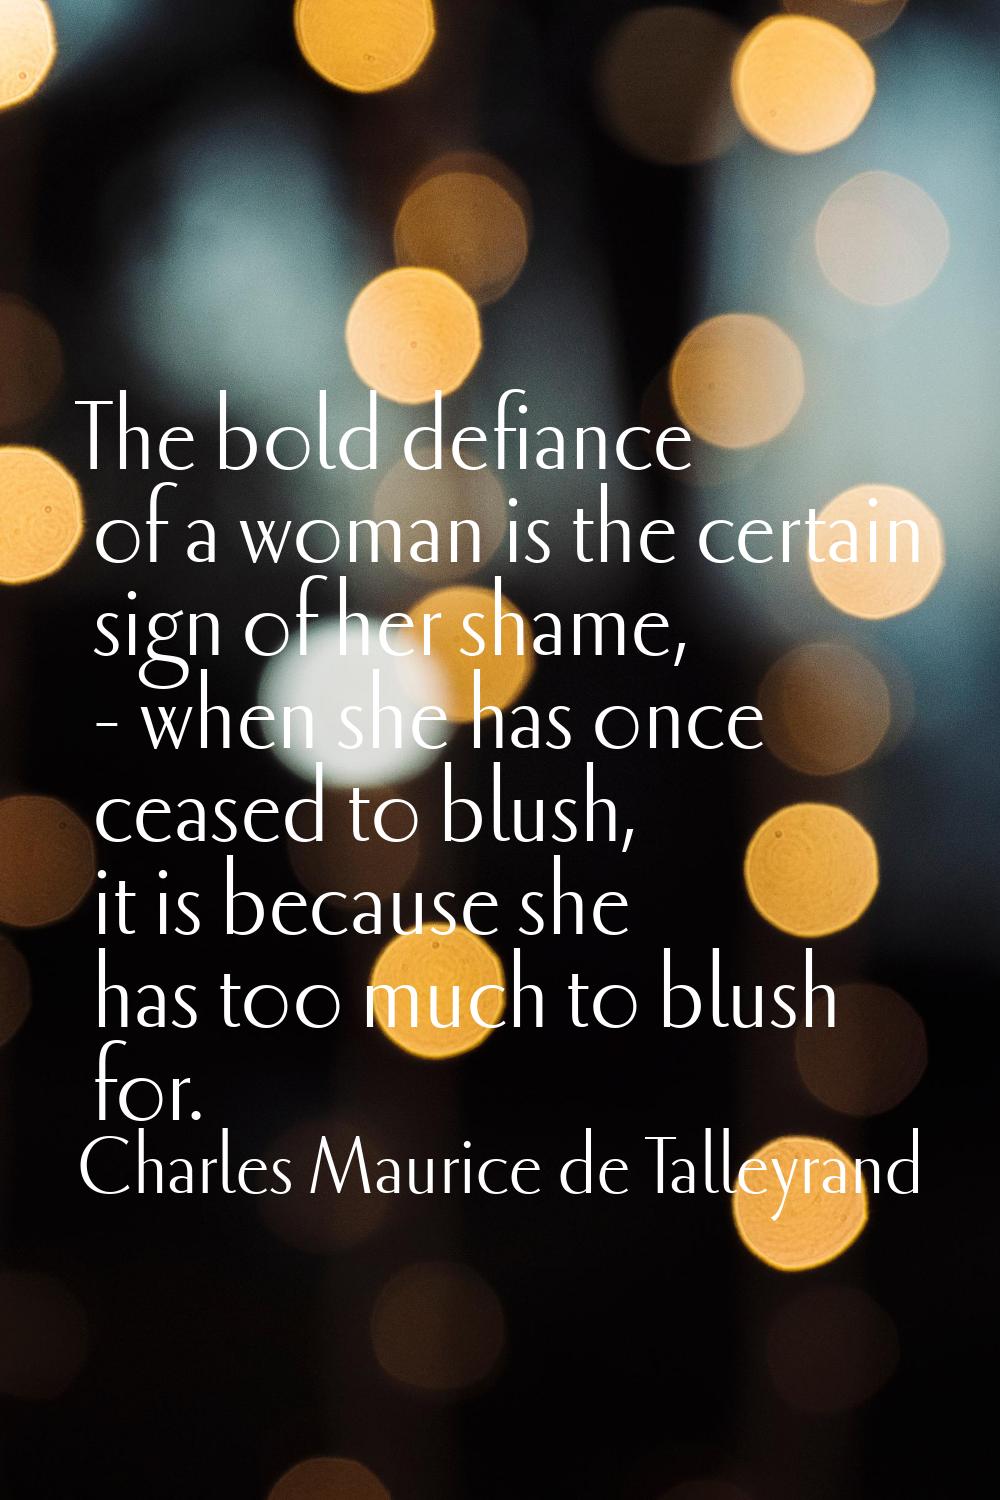 The bold defiance of a woman is the certain sign of her shame, - when she has once ceased to blush,